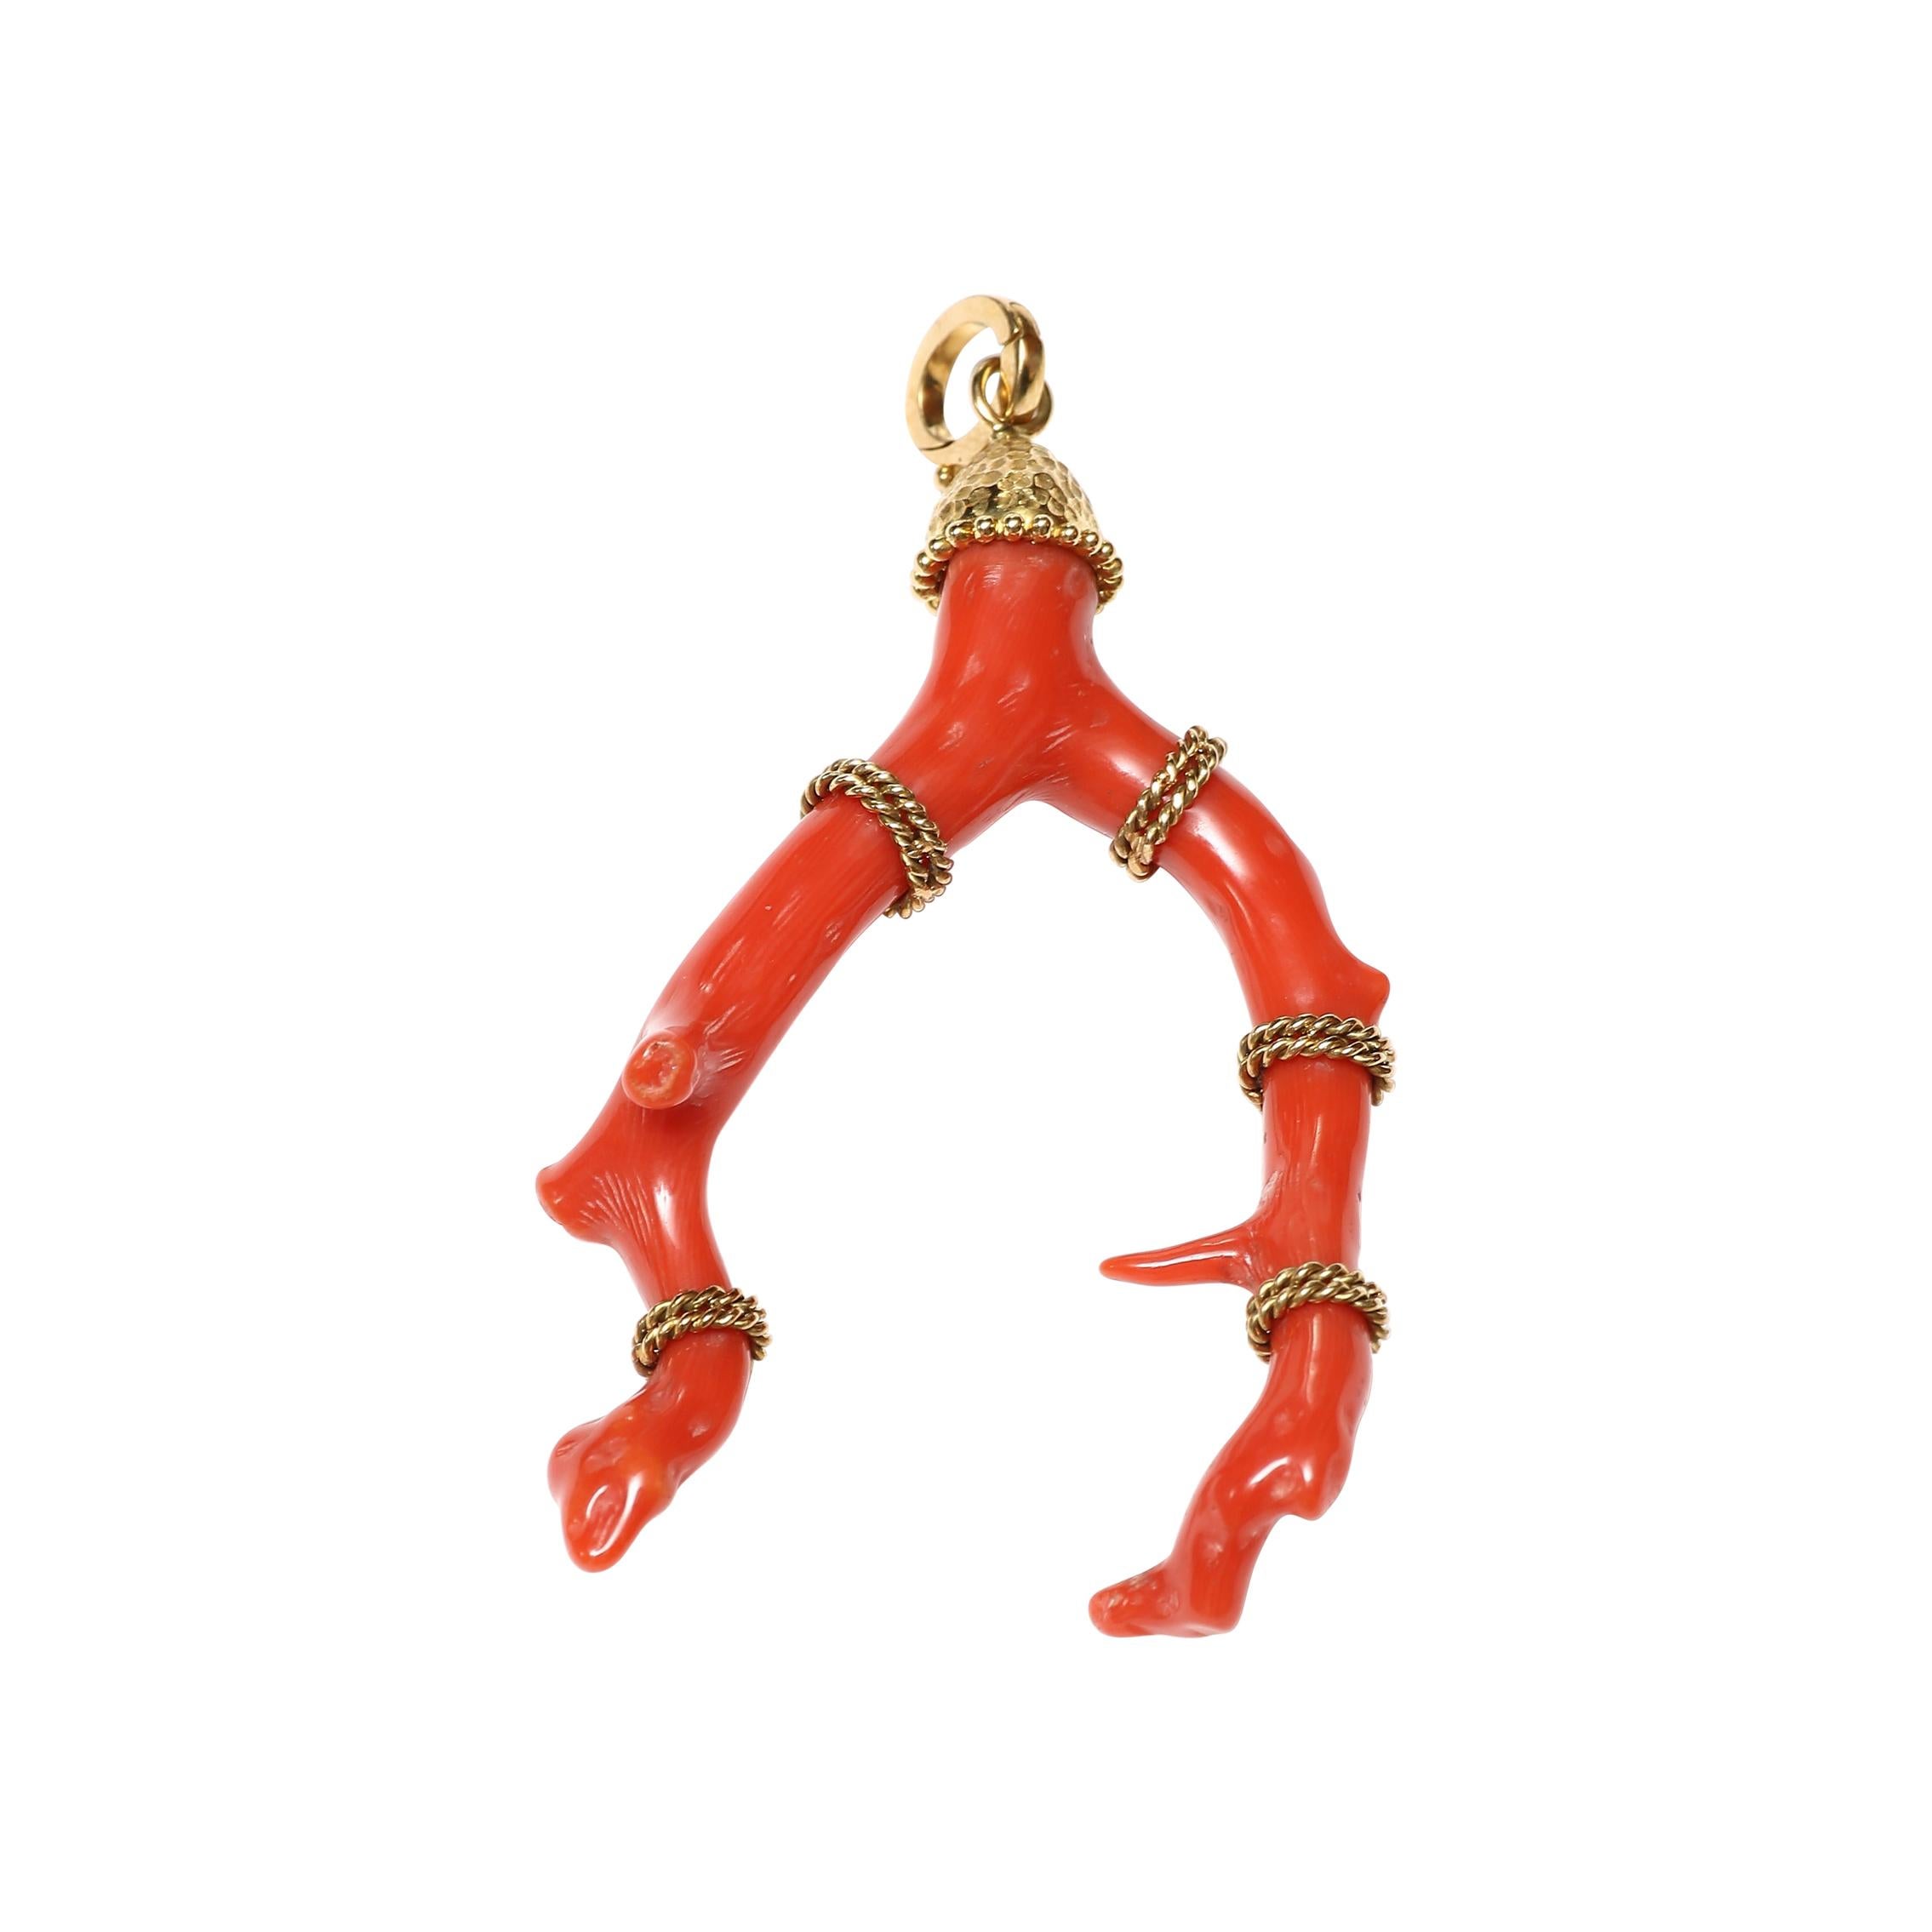 Sardinian Branch Coral Pendant with Hand-Hammered 18 Karat Gold For Sale